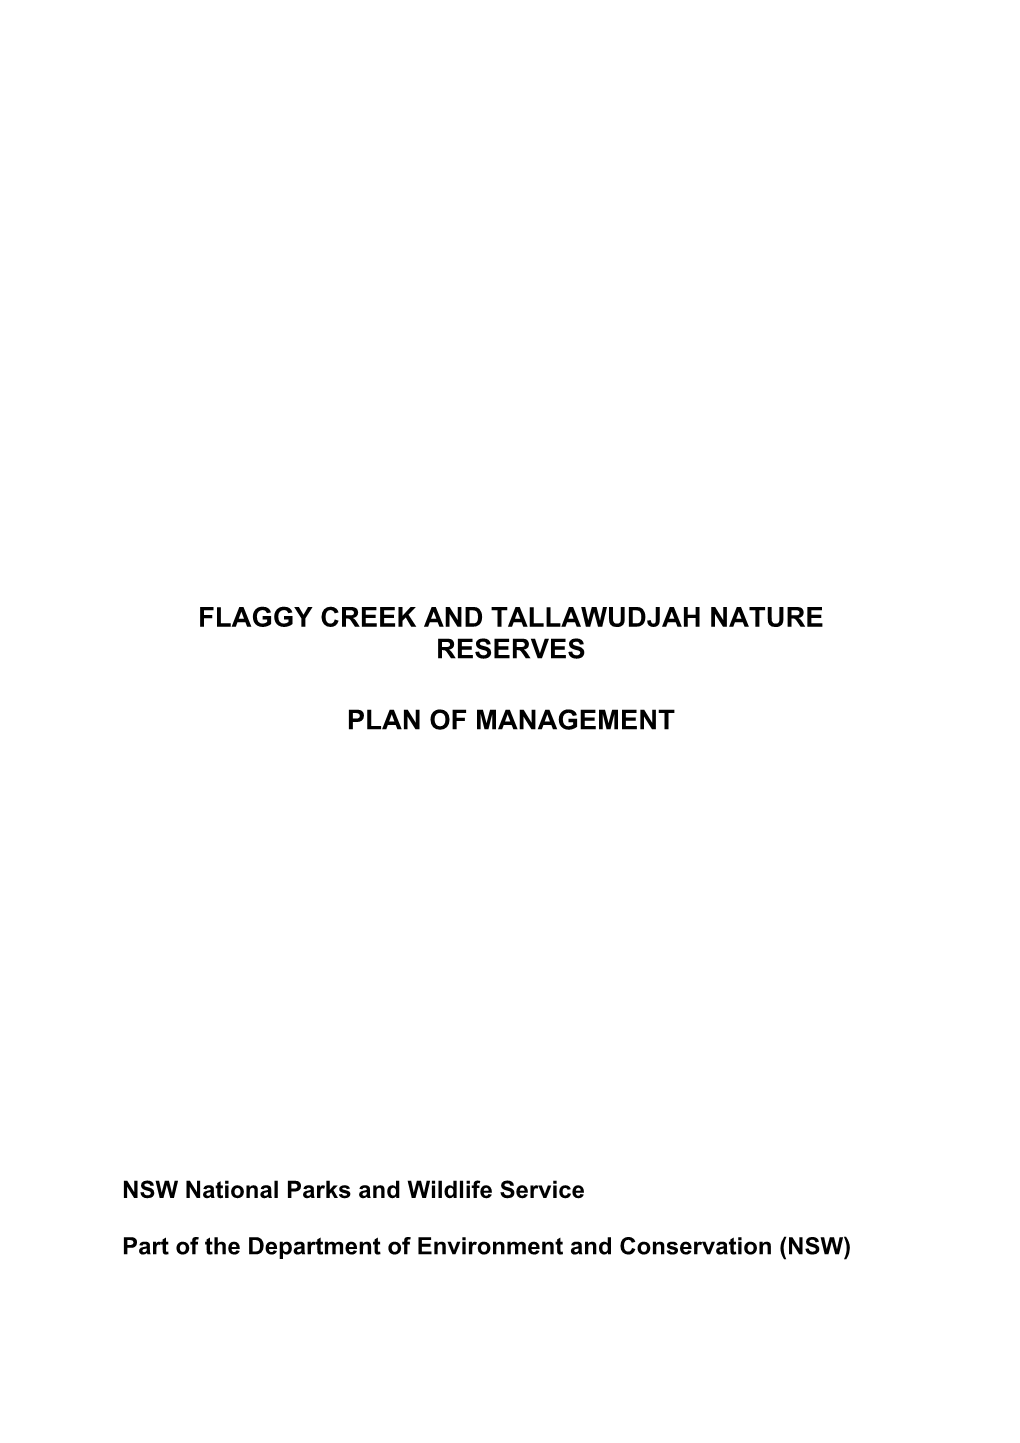 Flaggy Creek and Tallawudjah Nature Reserves Plan Of